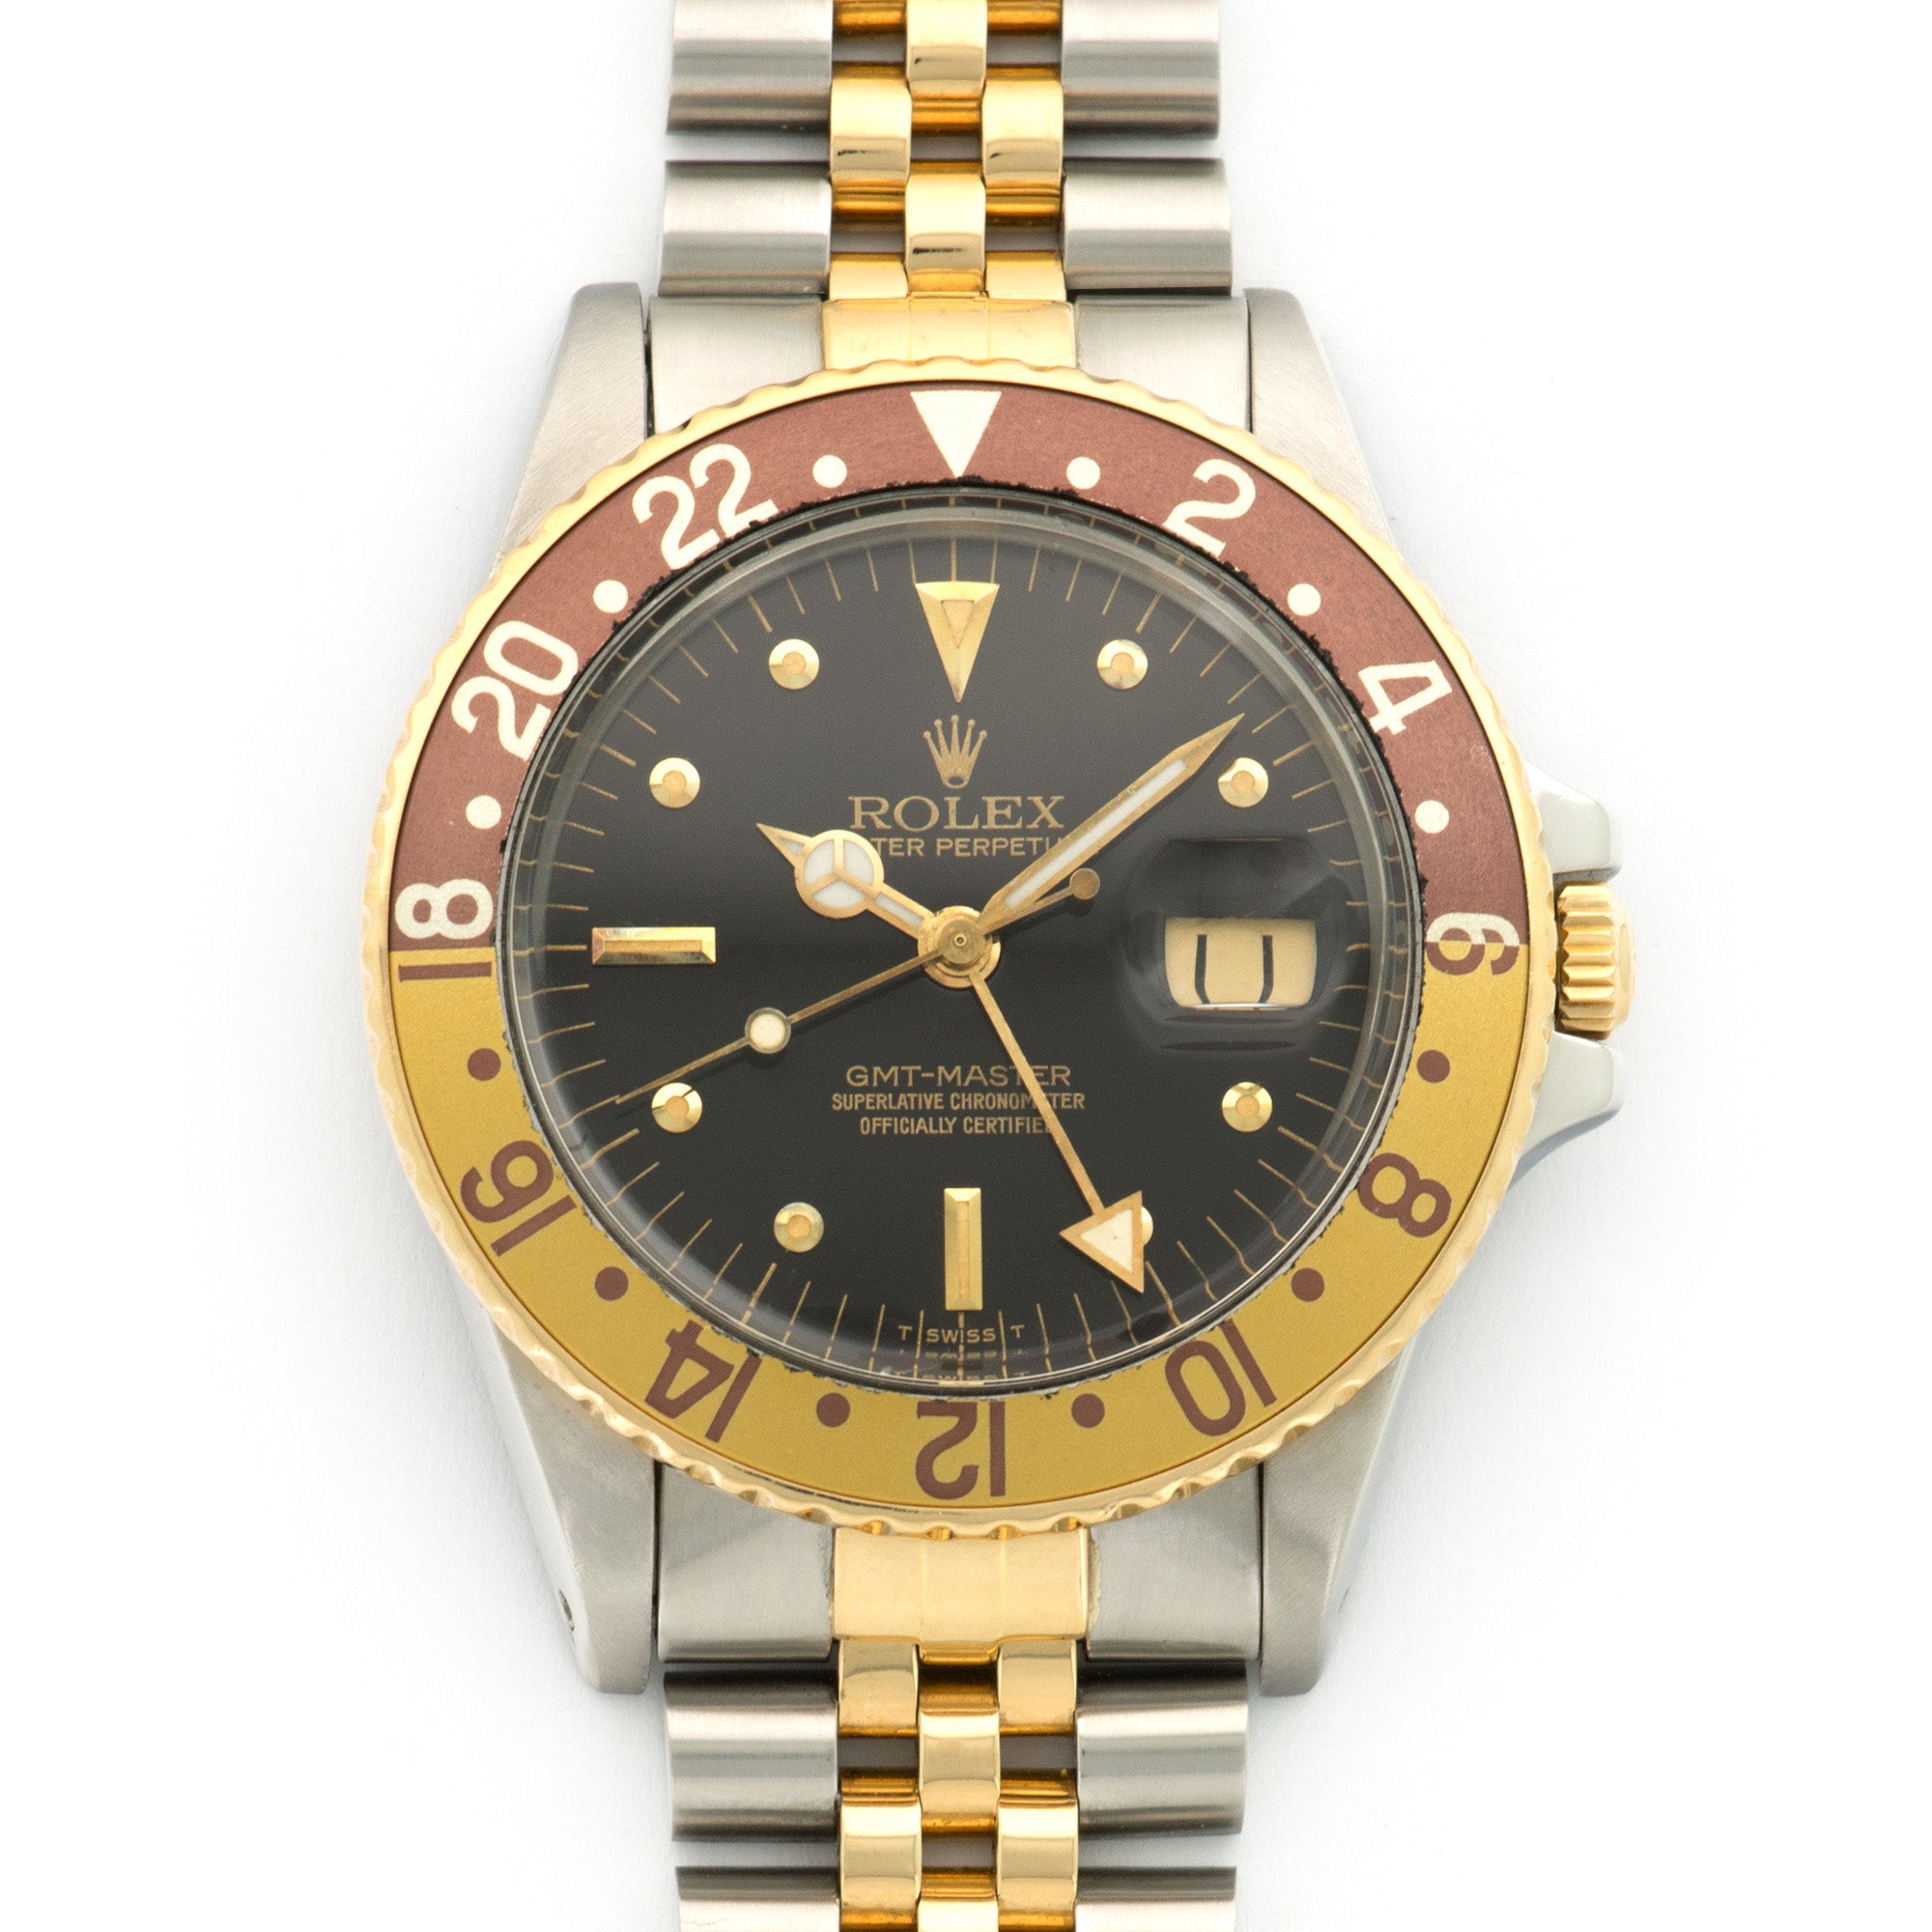 Rolex - Rolex Two-Tone GMT-Master Root Beer Watch Ref. 16753 - The Keystone Watches